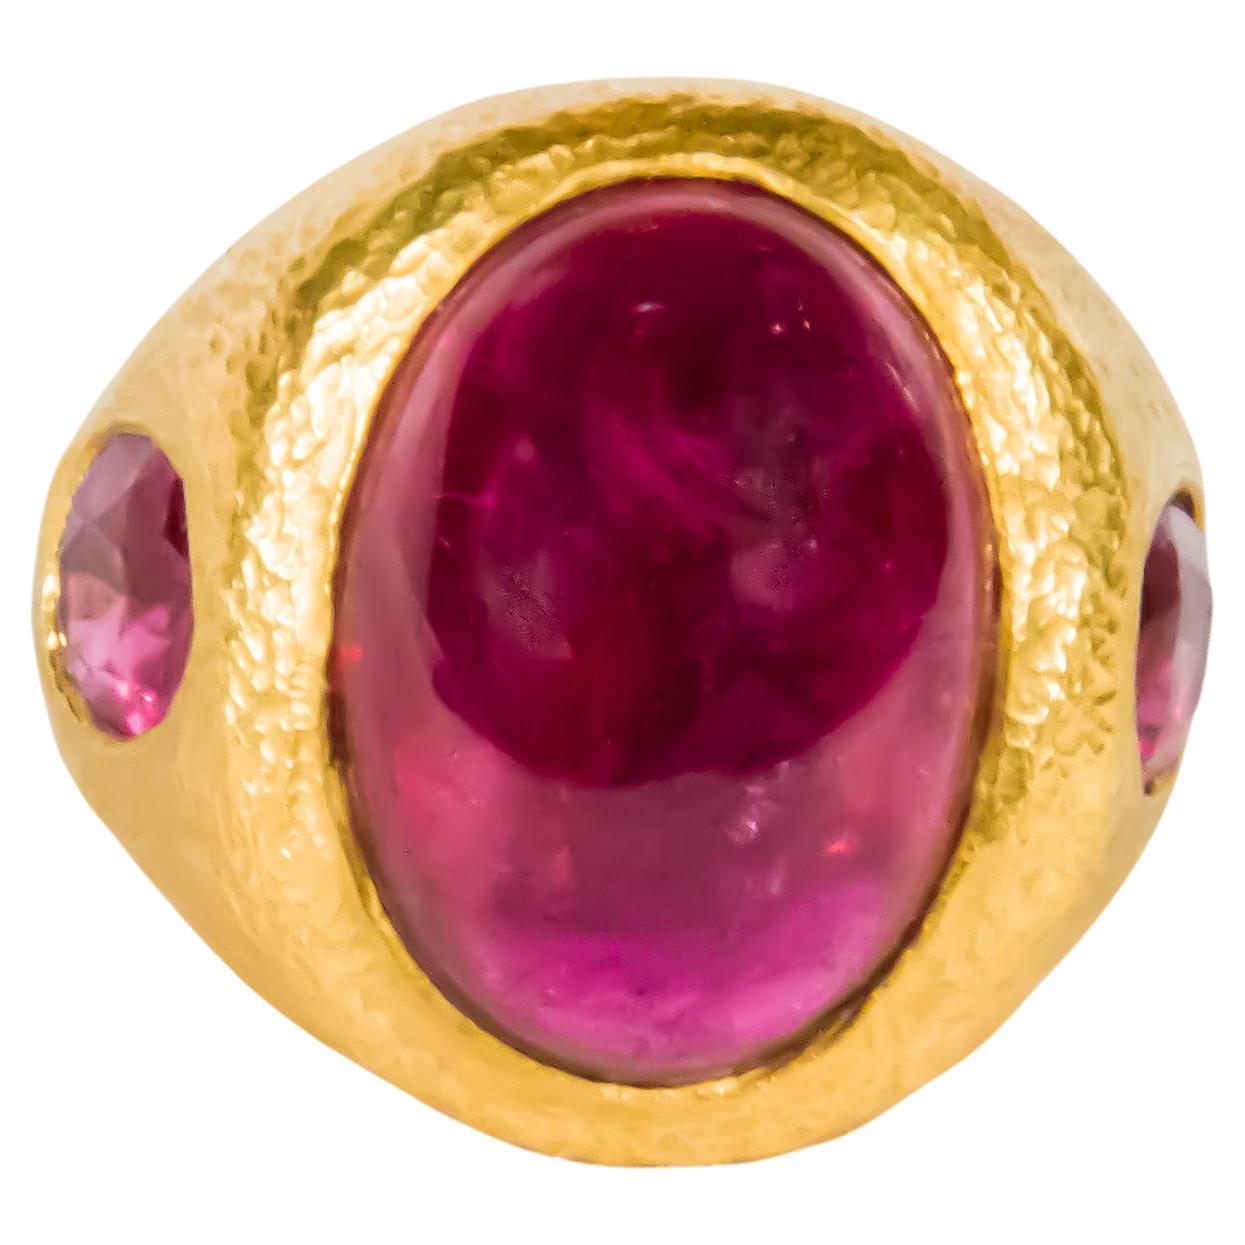 1 of a Kind Julia Boss 24 Karat Oval Cabochon 20 Carat Ruby Ring For Sale